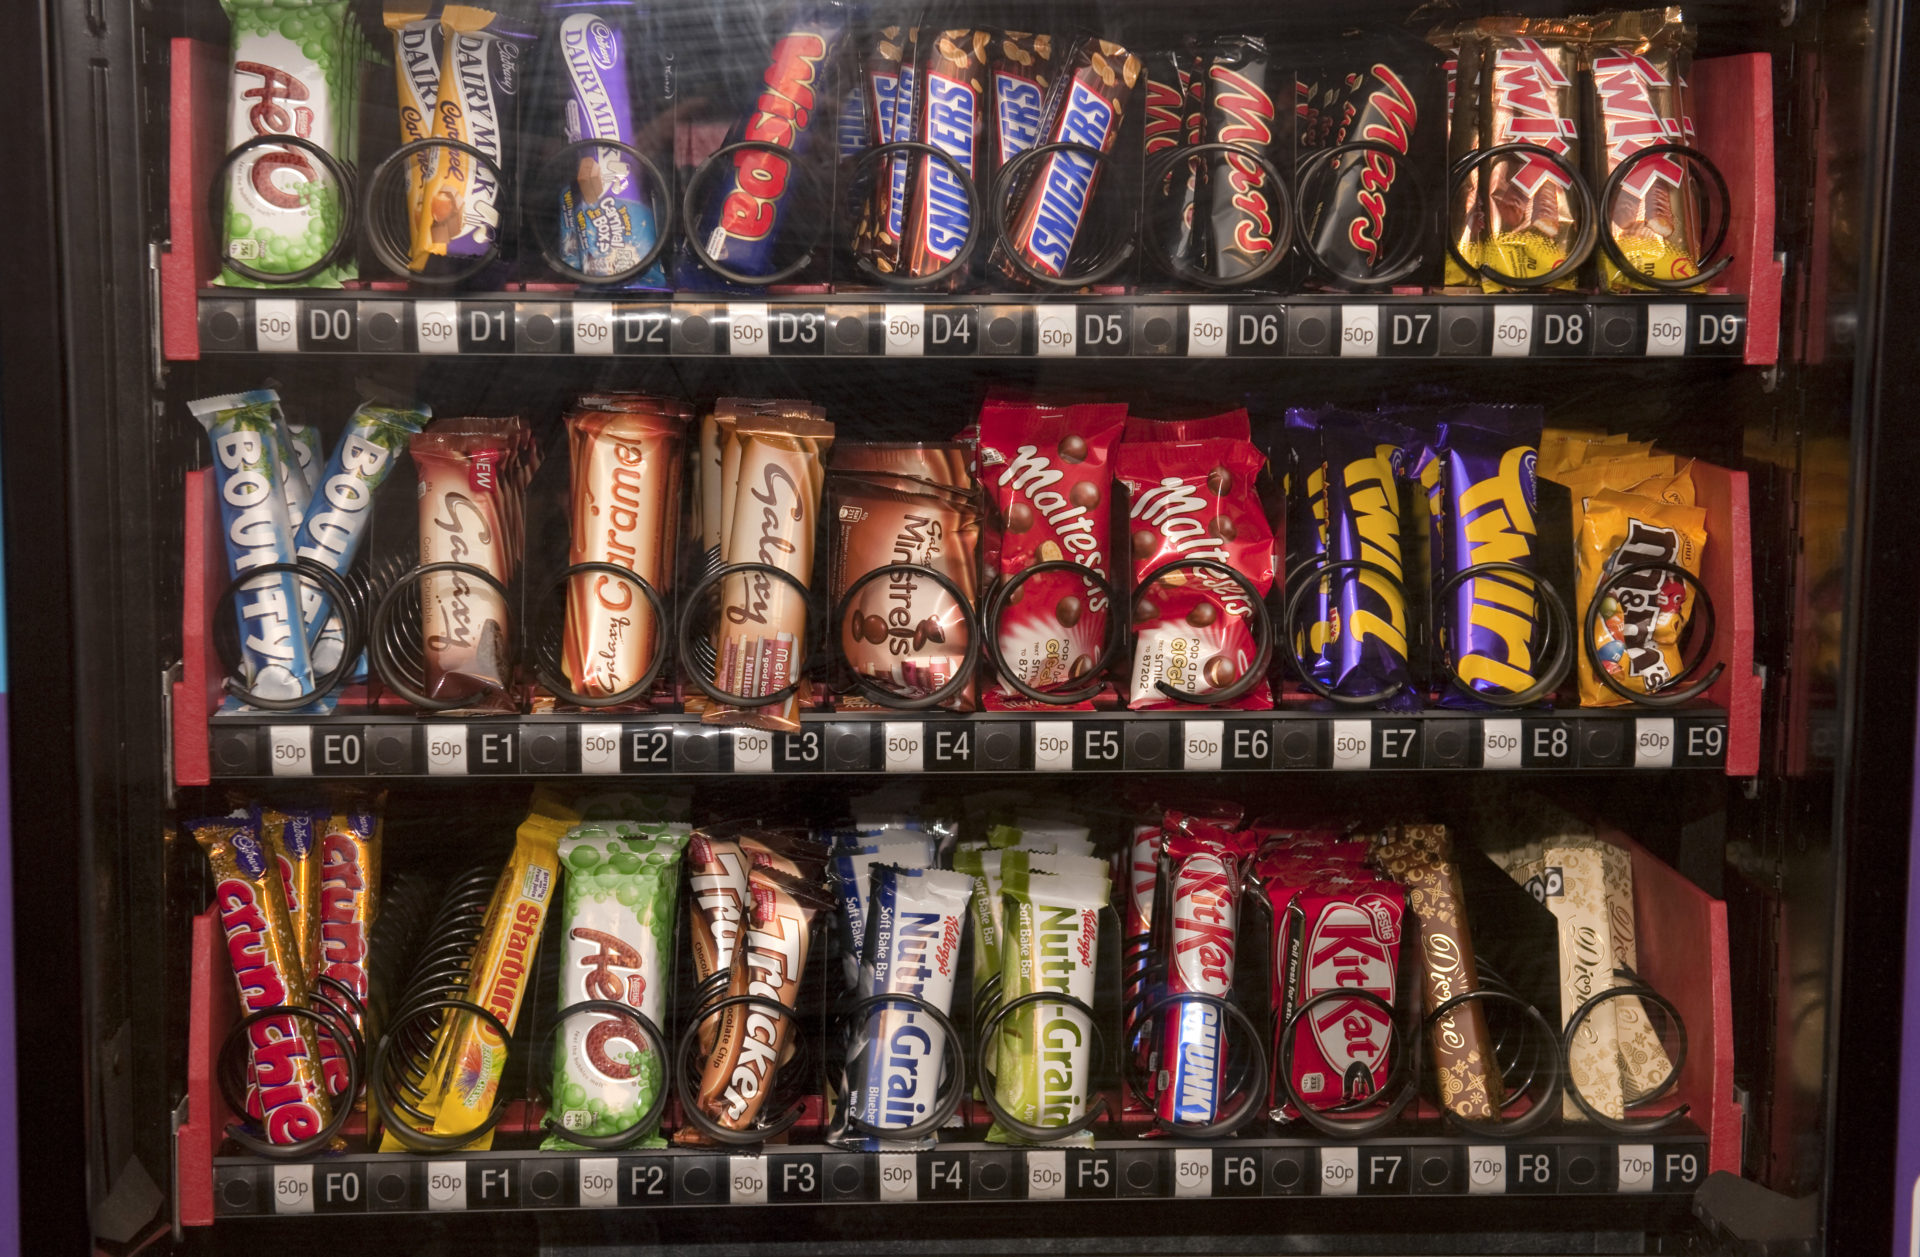 A close up of chocolate bars in a vending machine - chocolate bars are often subject to 'shrinkflation'